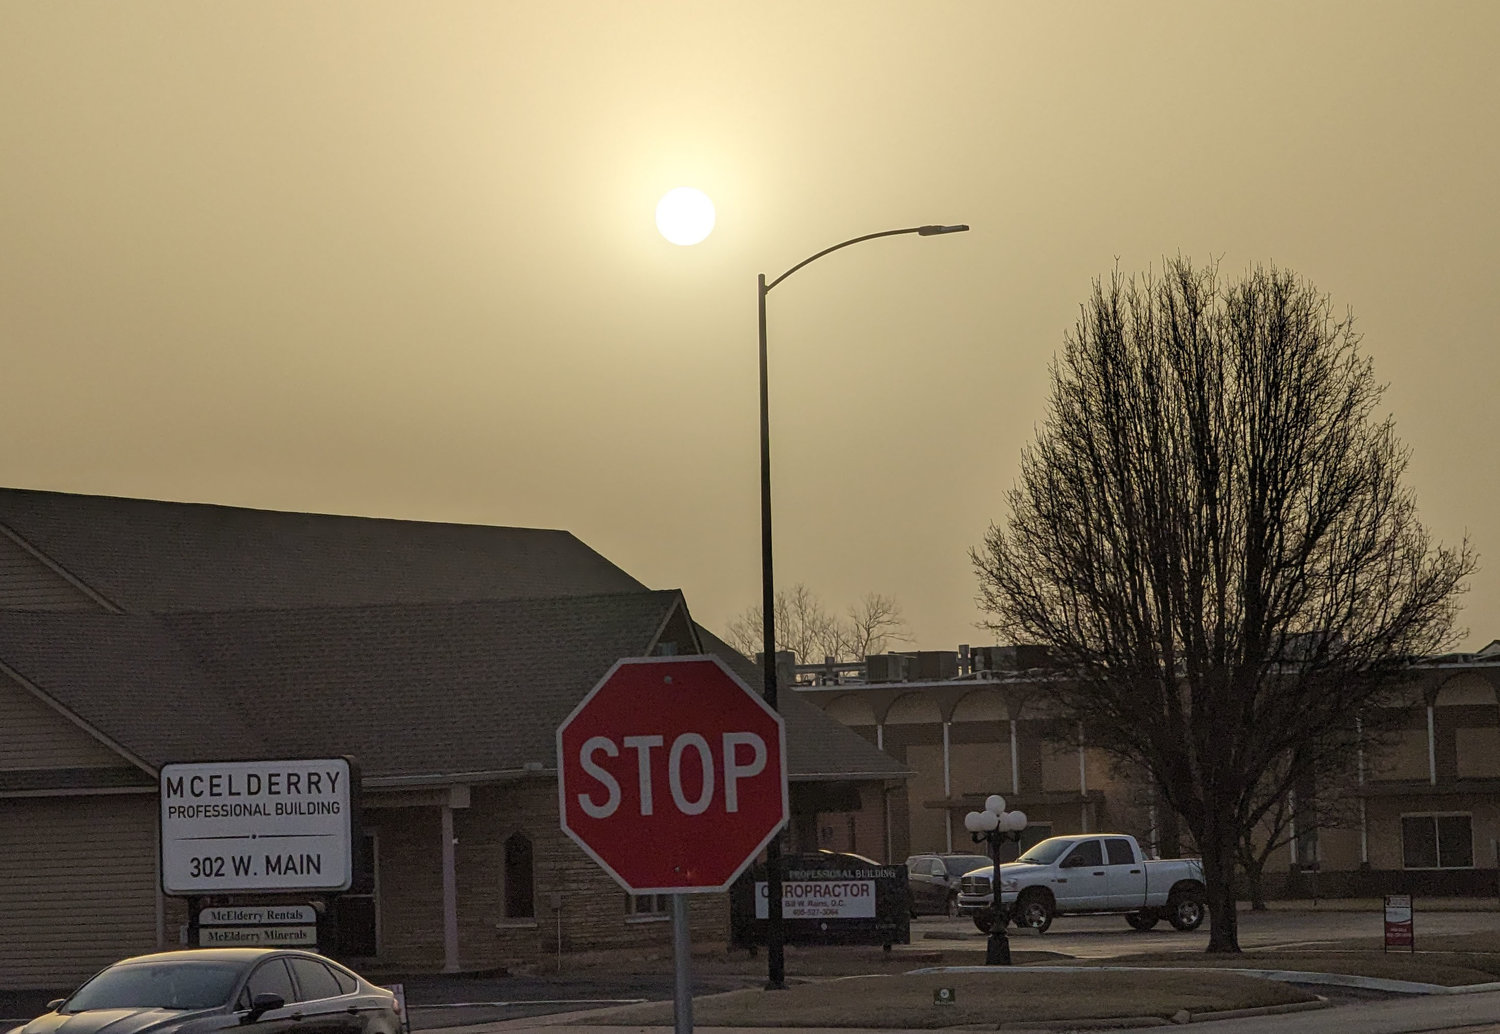 Strong winds with gusts over 50 mph blanked the sky with a dusty haze Tuesday afternoon.